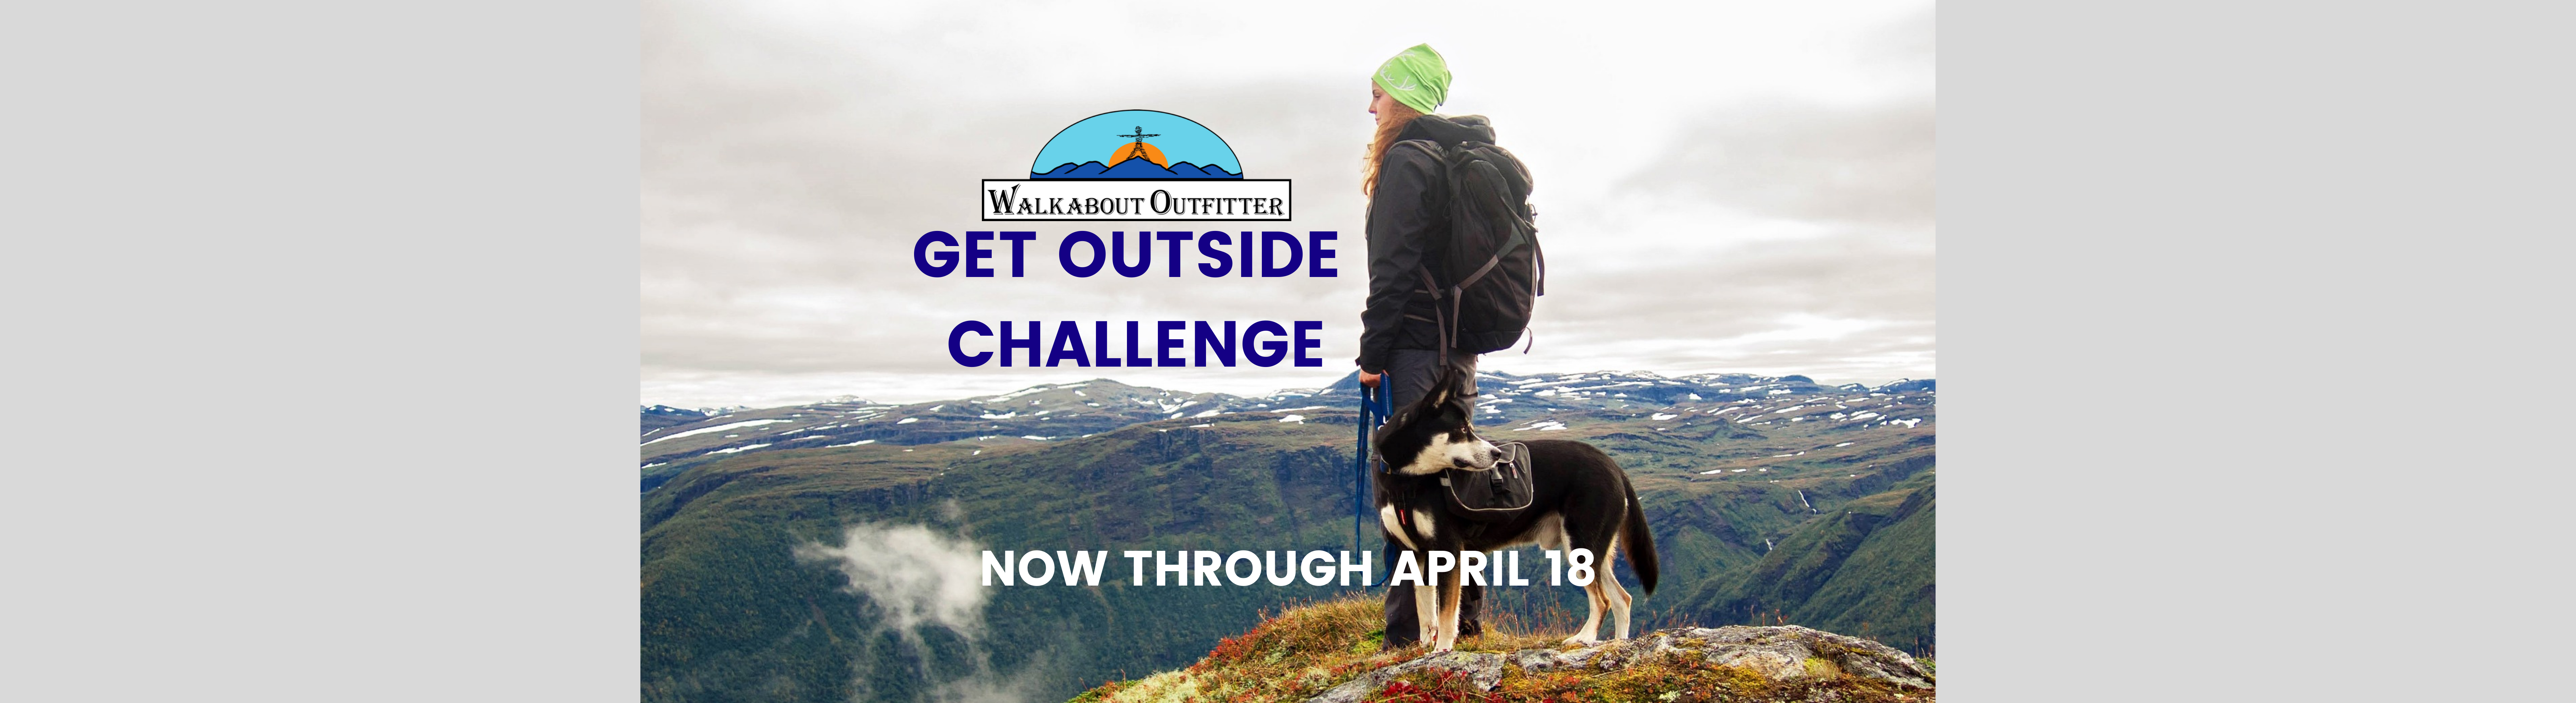 Walkabout Challenge - Get Outside 2021 (NOW - April 18)